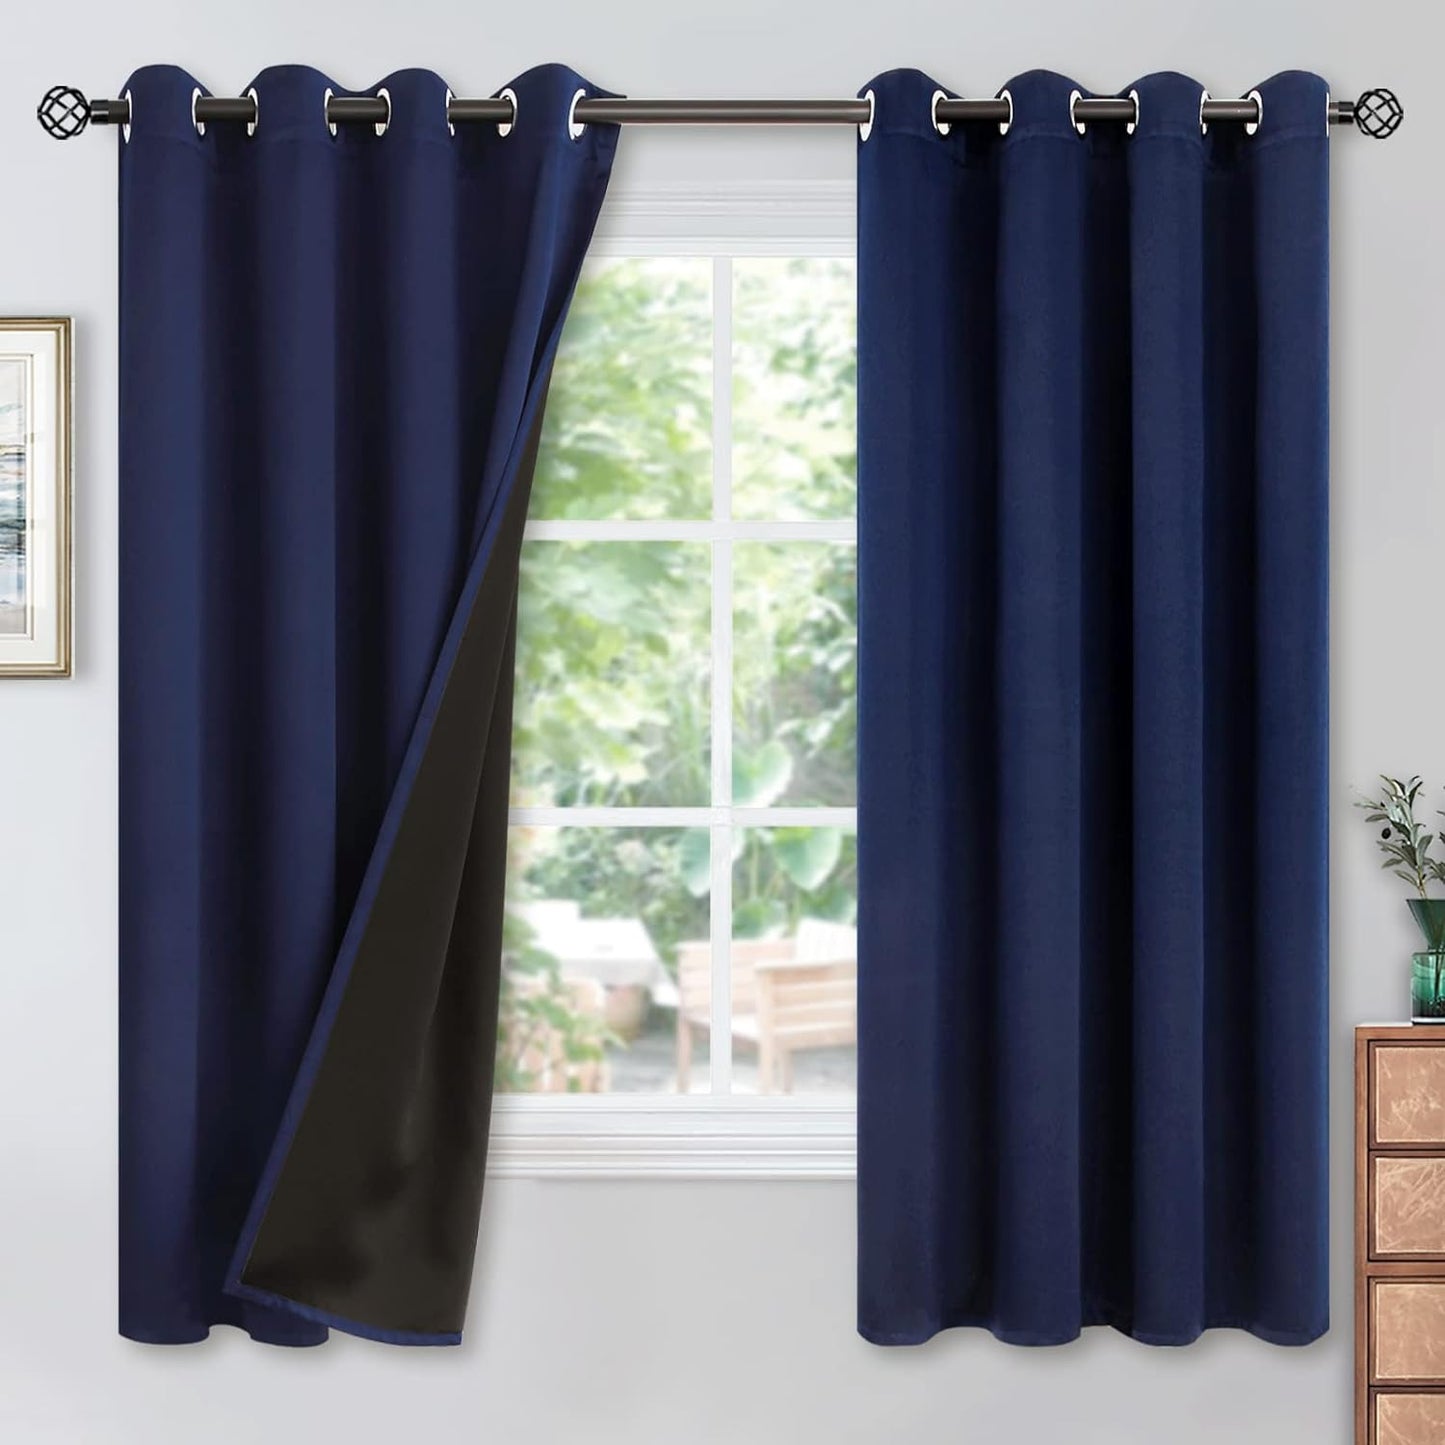 Youngstex Black 100% Blackout Curtains 63 Inches for Bedroom Thermal Insulated Total Room Darkening Curtains for Living Room Window with Black Back Grommet, 2 Panels, 42 X 63 Inch  YoungsTex Navy 52W X 63L 